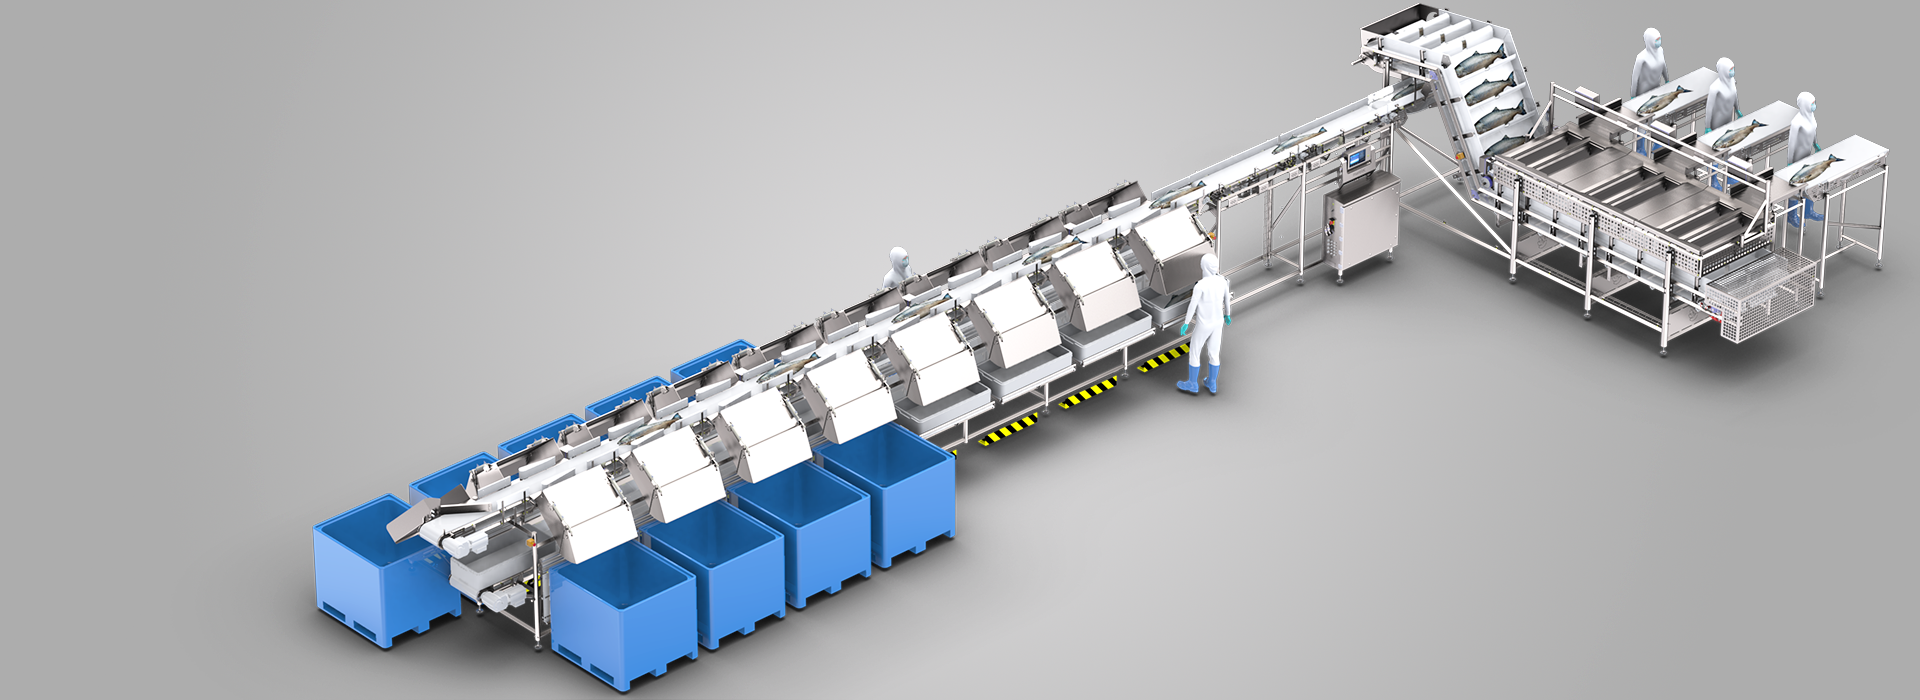 MARELEC's fast and gentle salmon grader provides unparalleled accuracy with unlimited sorting capabilities.